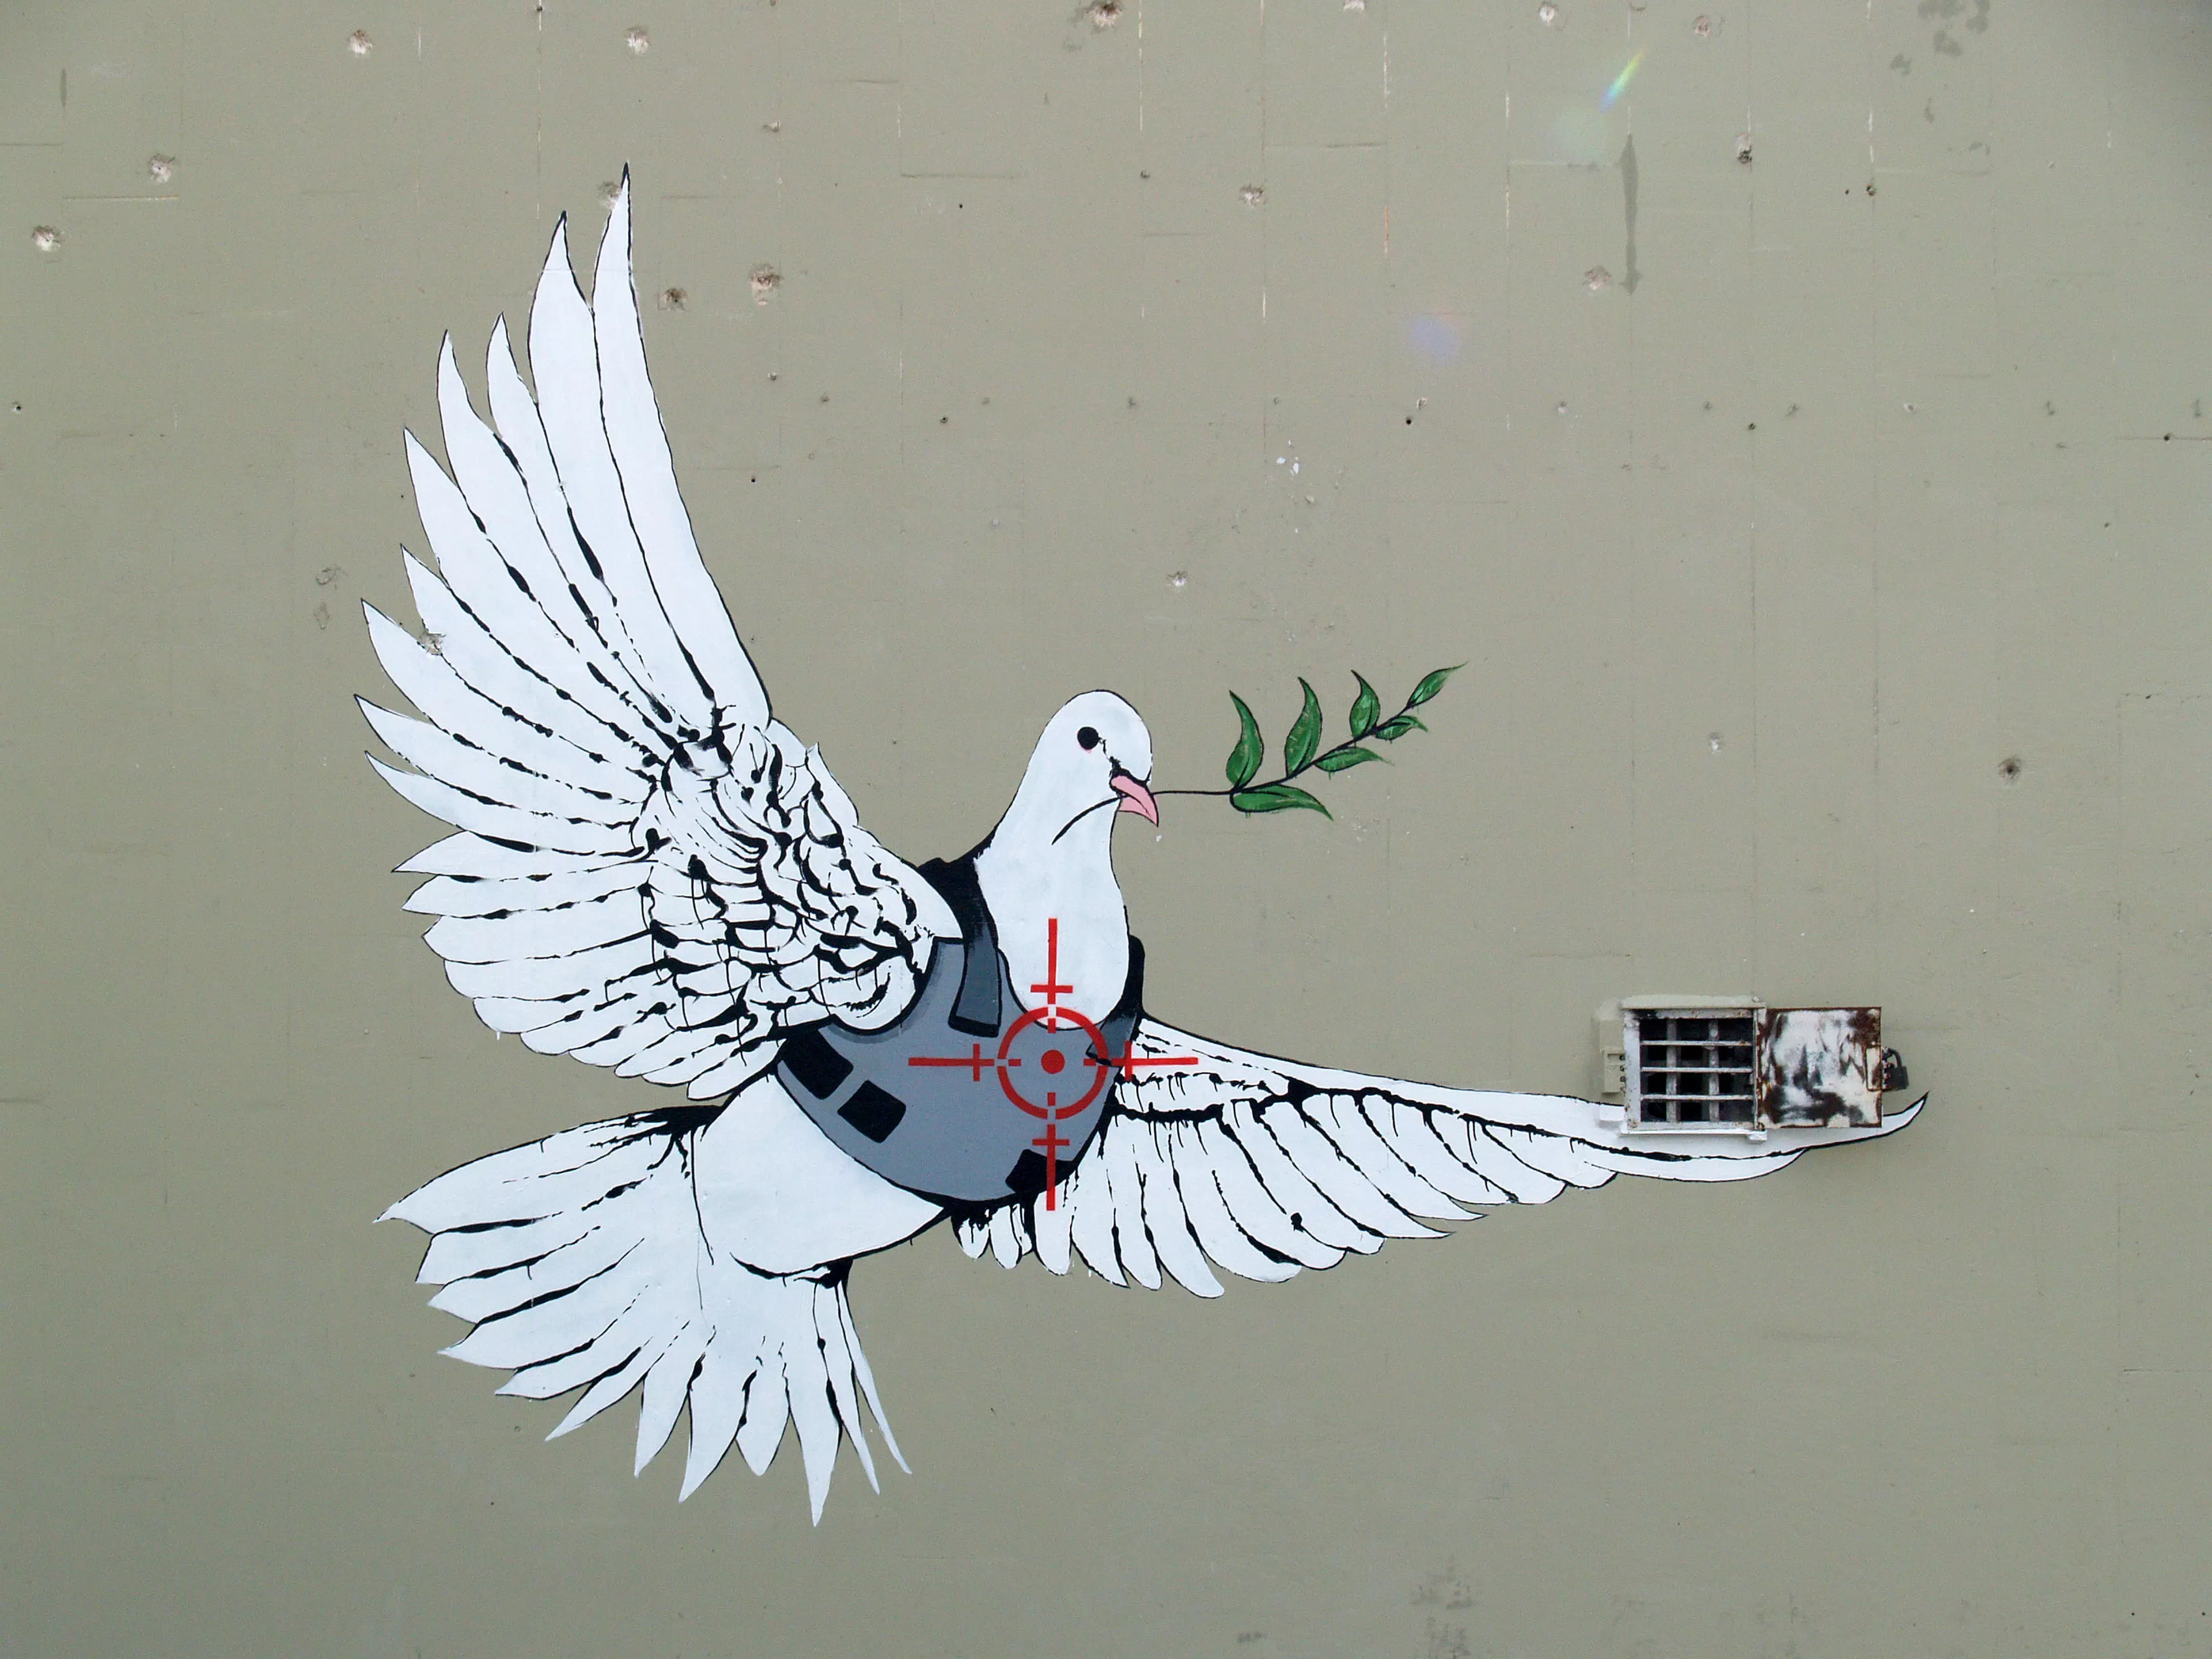 Banksy's 'Dove of Peace' painted on a wall in Bethlehem, West Bank, Palestinian Authority in 2007.